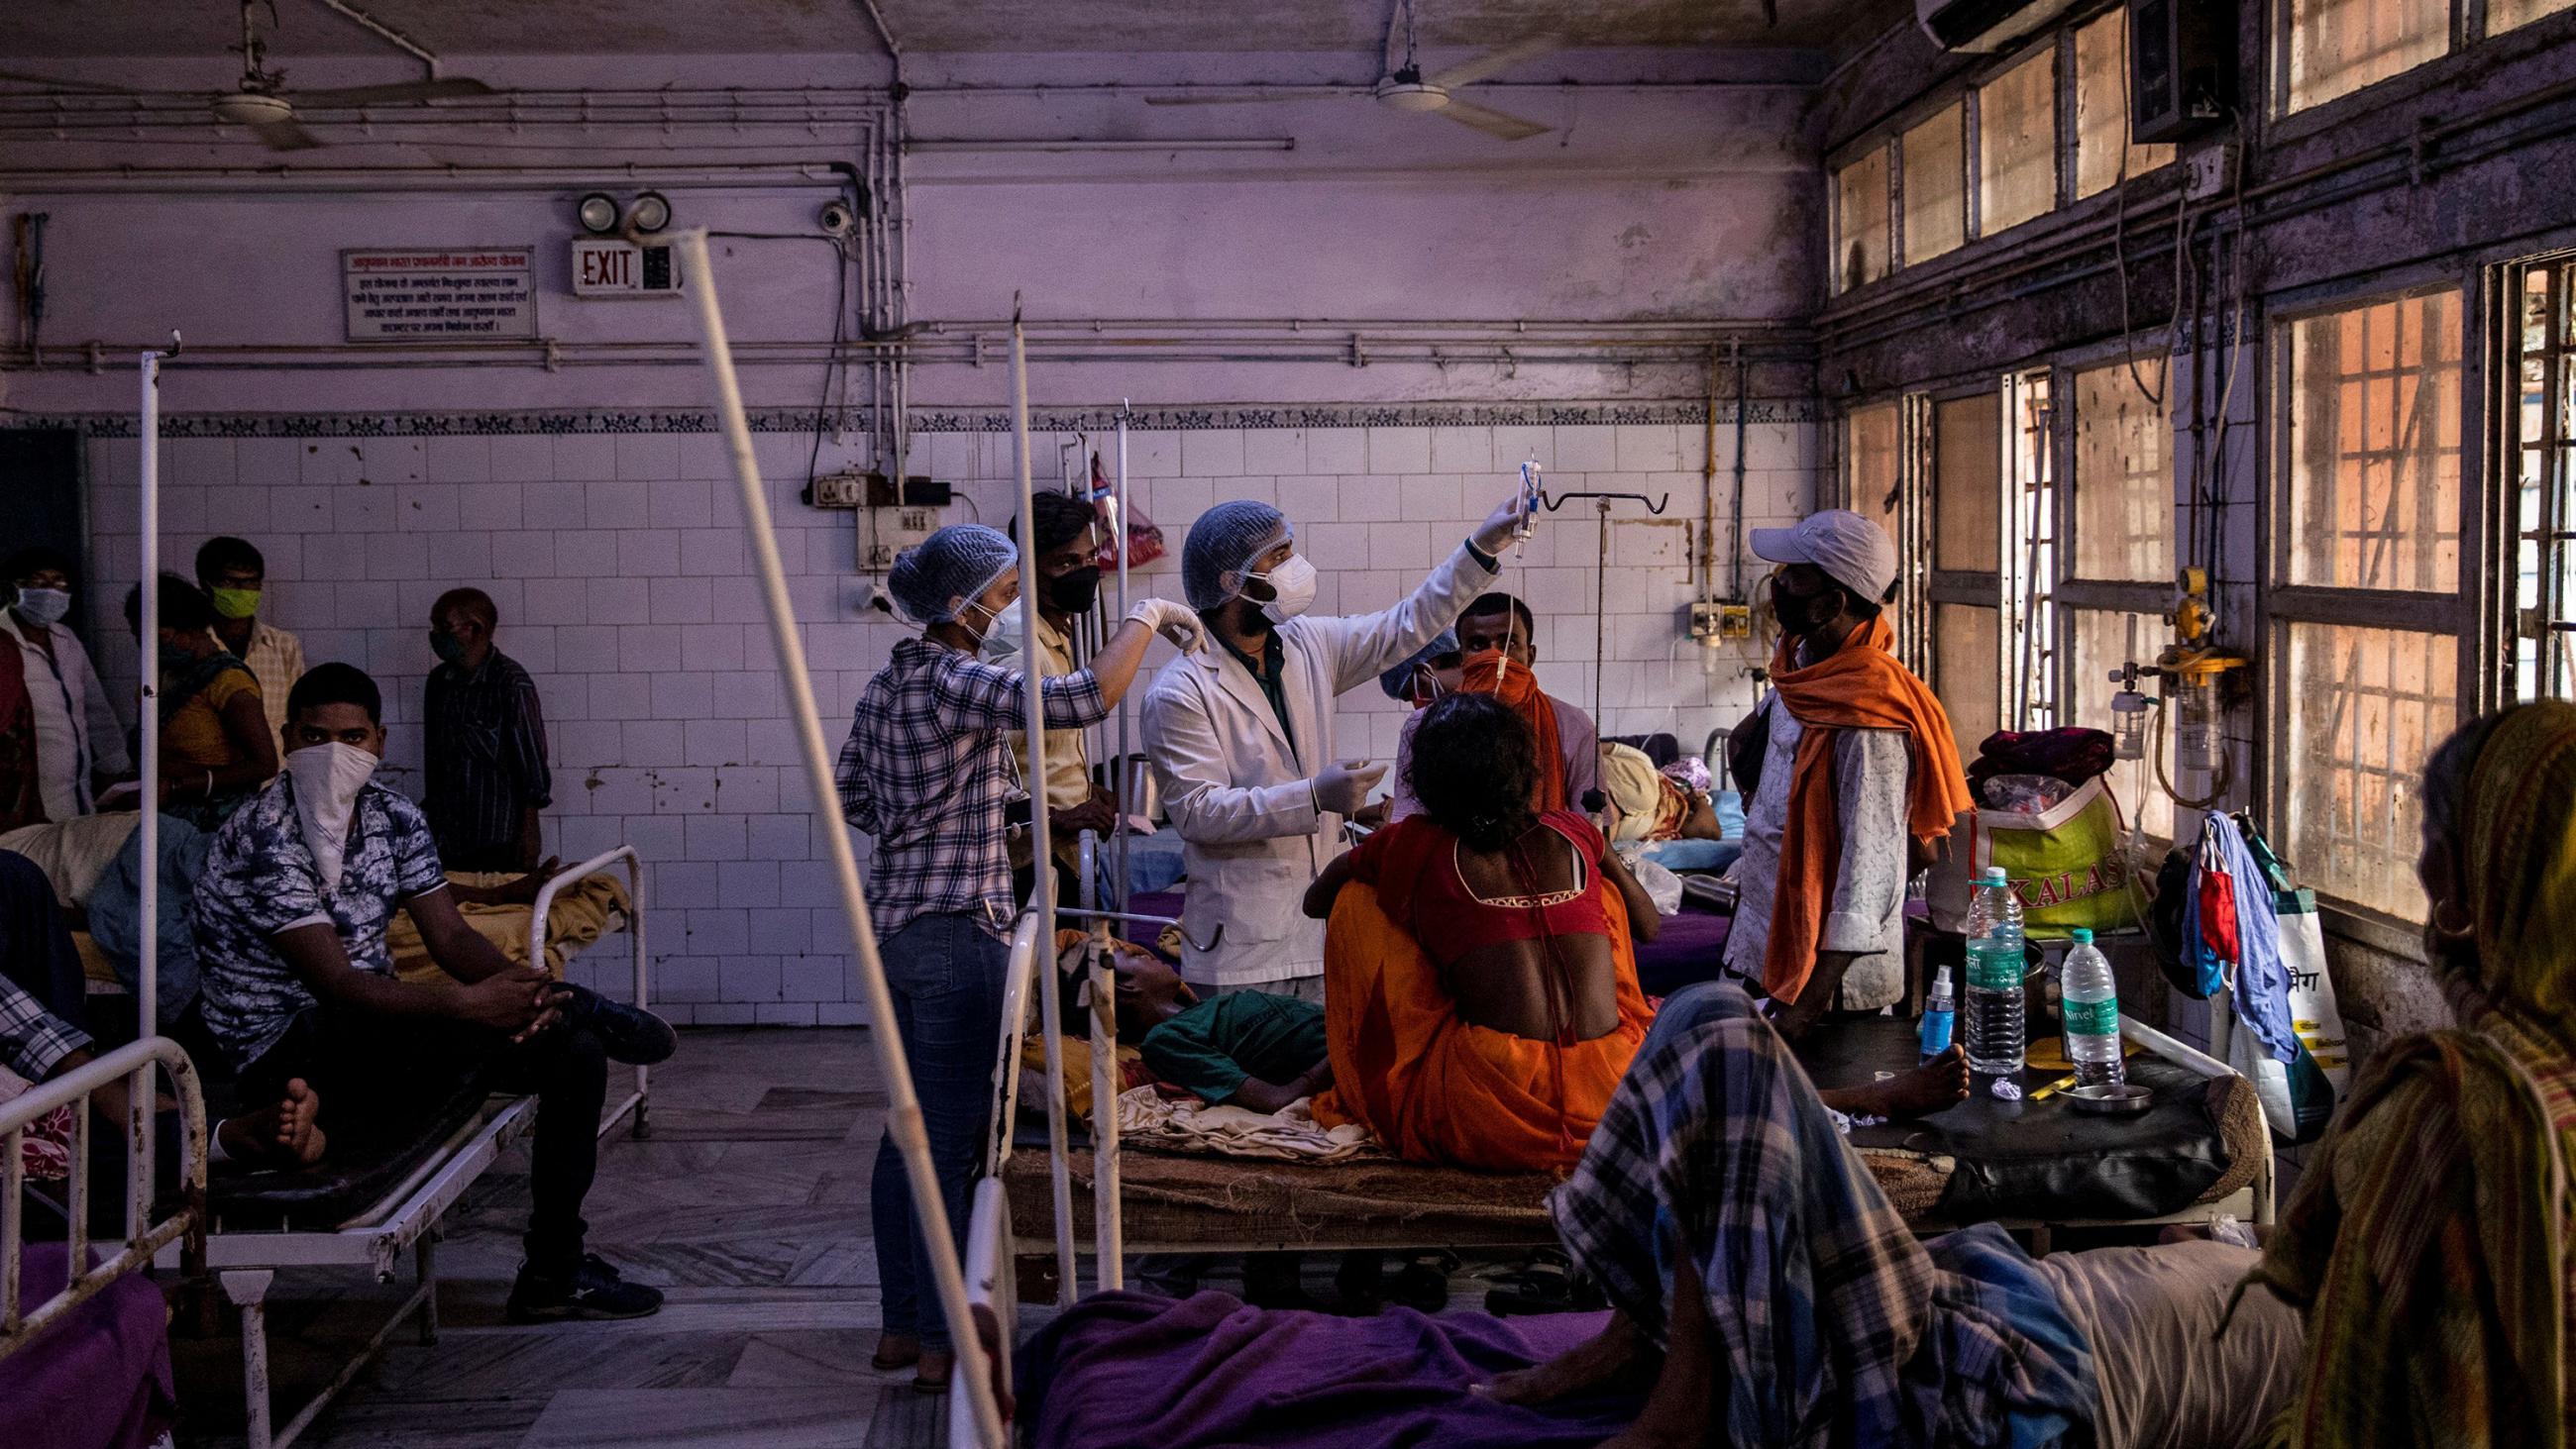 Telemedicine has expanded in the pandemic—an alternative to the traditional ward like the one shown here—at Jawahar Lal Nehru hospital, shown during COVID-19 in Bhagalpur, India, on July 27, 2020. Photo shows a large ward bustling with people, including several seated in hospital beds. 